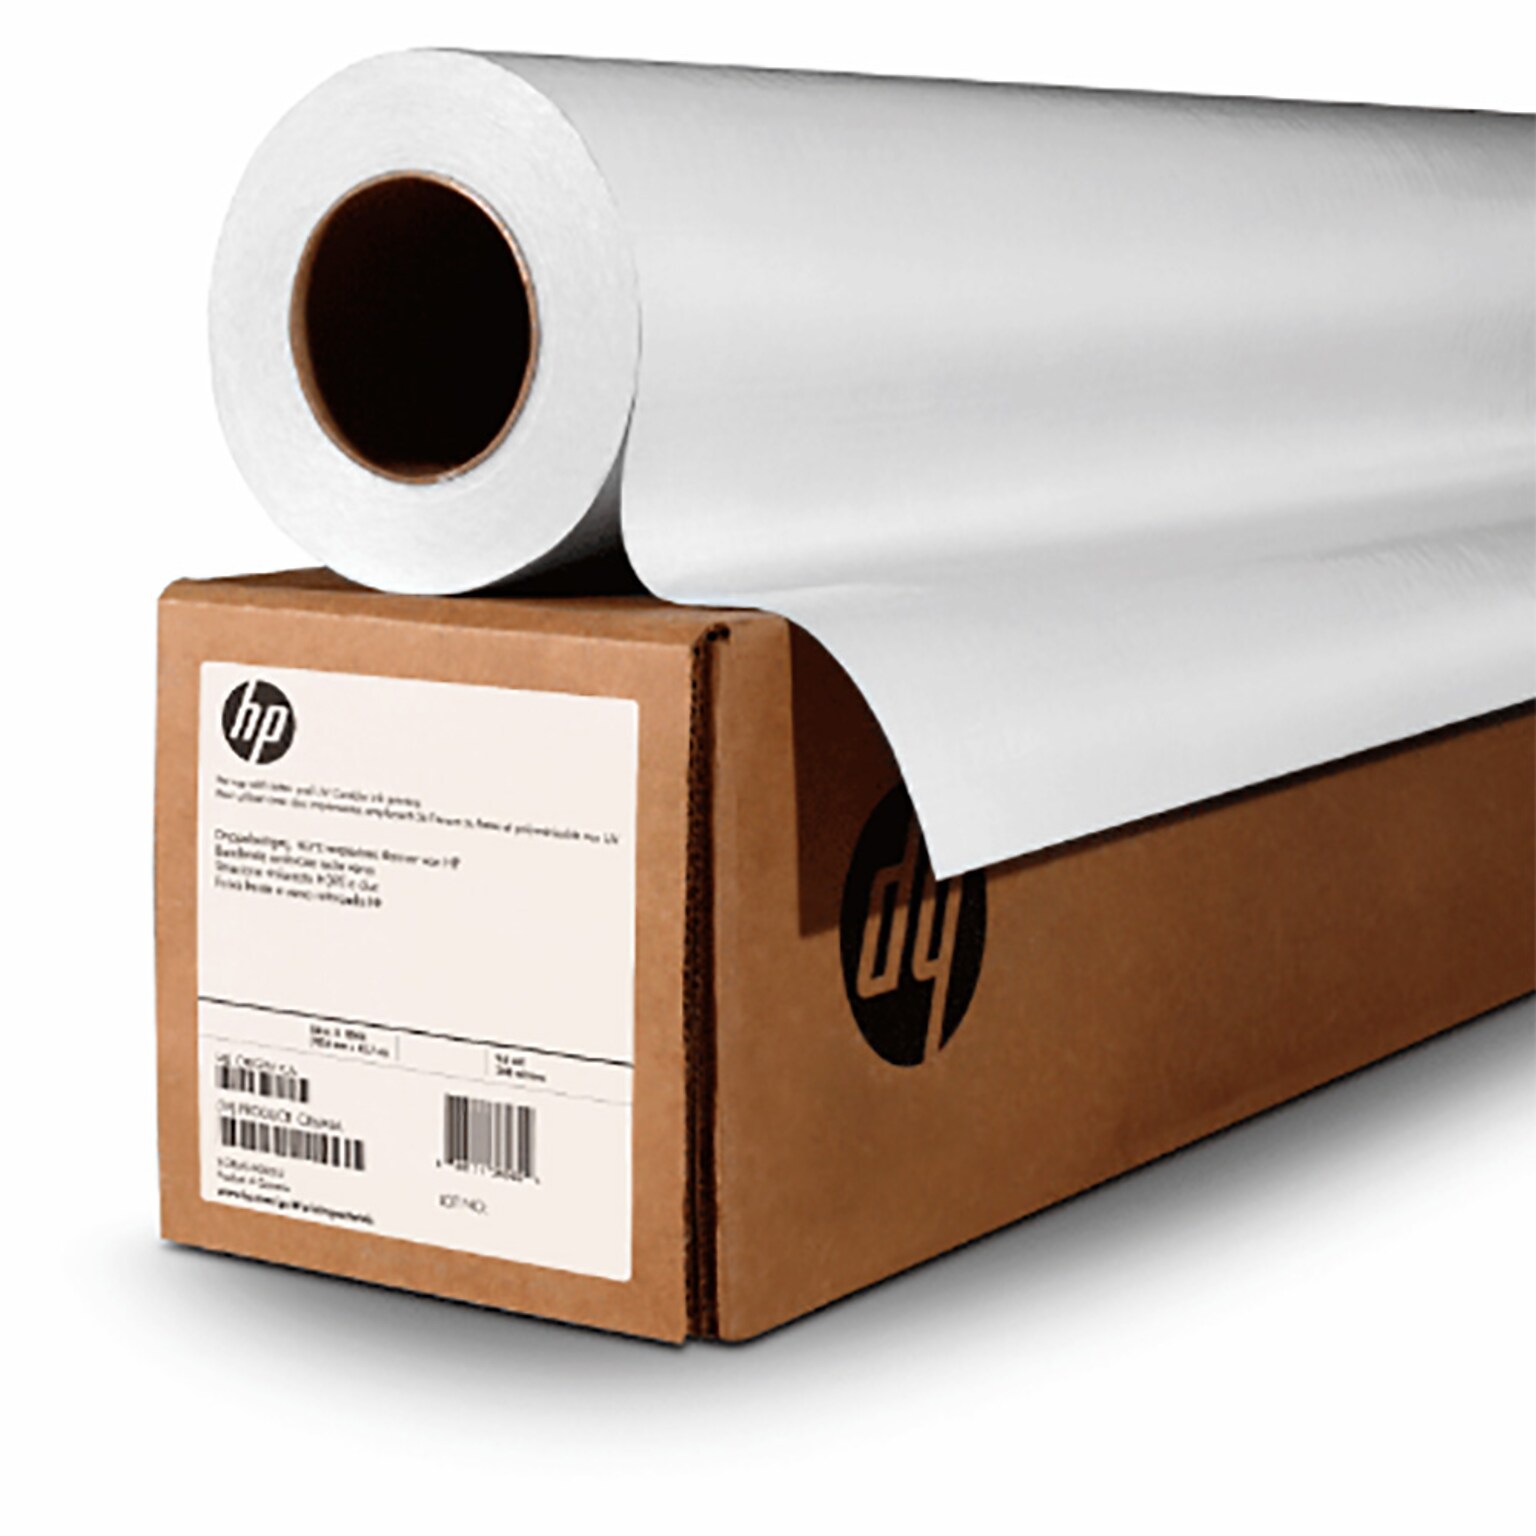 HP Universal Wide Format Premium Instant-dry Photo Paper, 60 x 100, Gloss Finish (Q7999A)